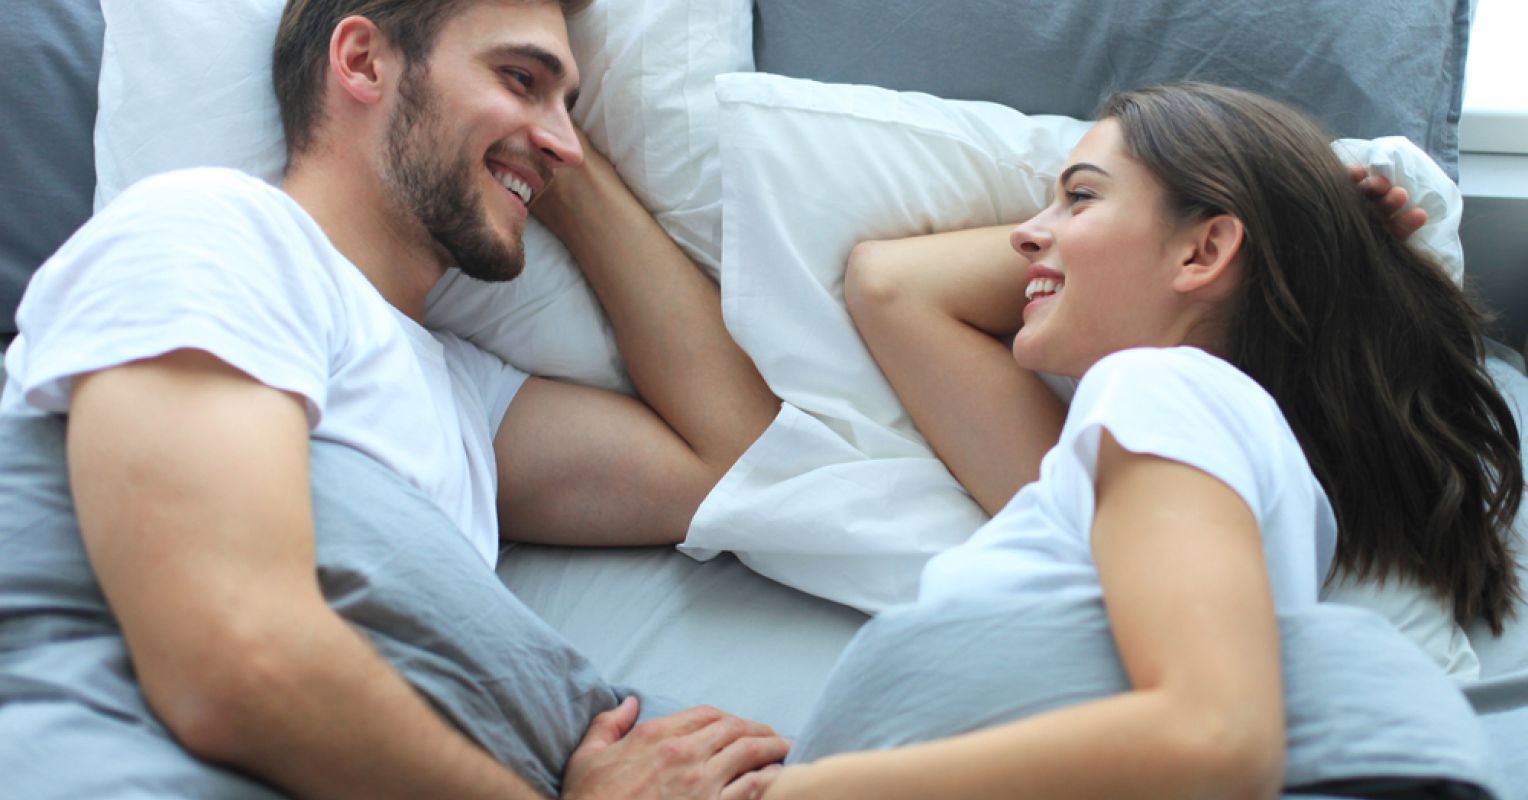 Pleasing Your Partner Is Half the Fun Psychology Today